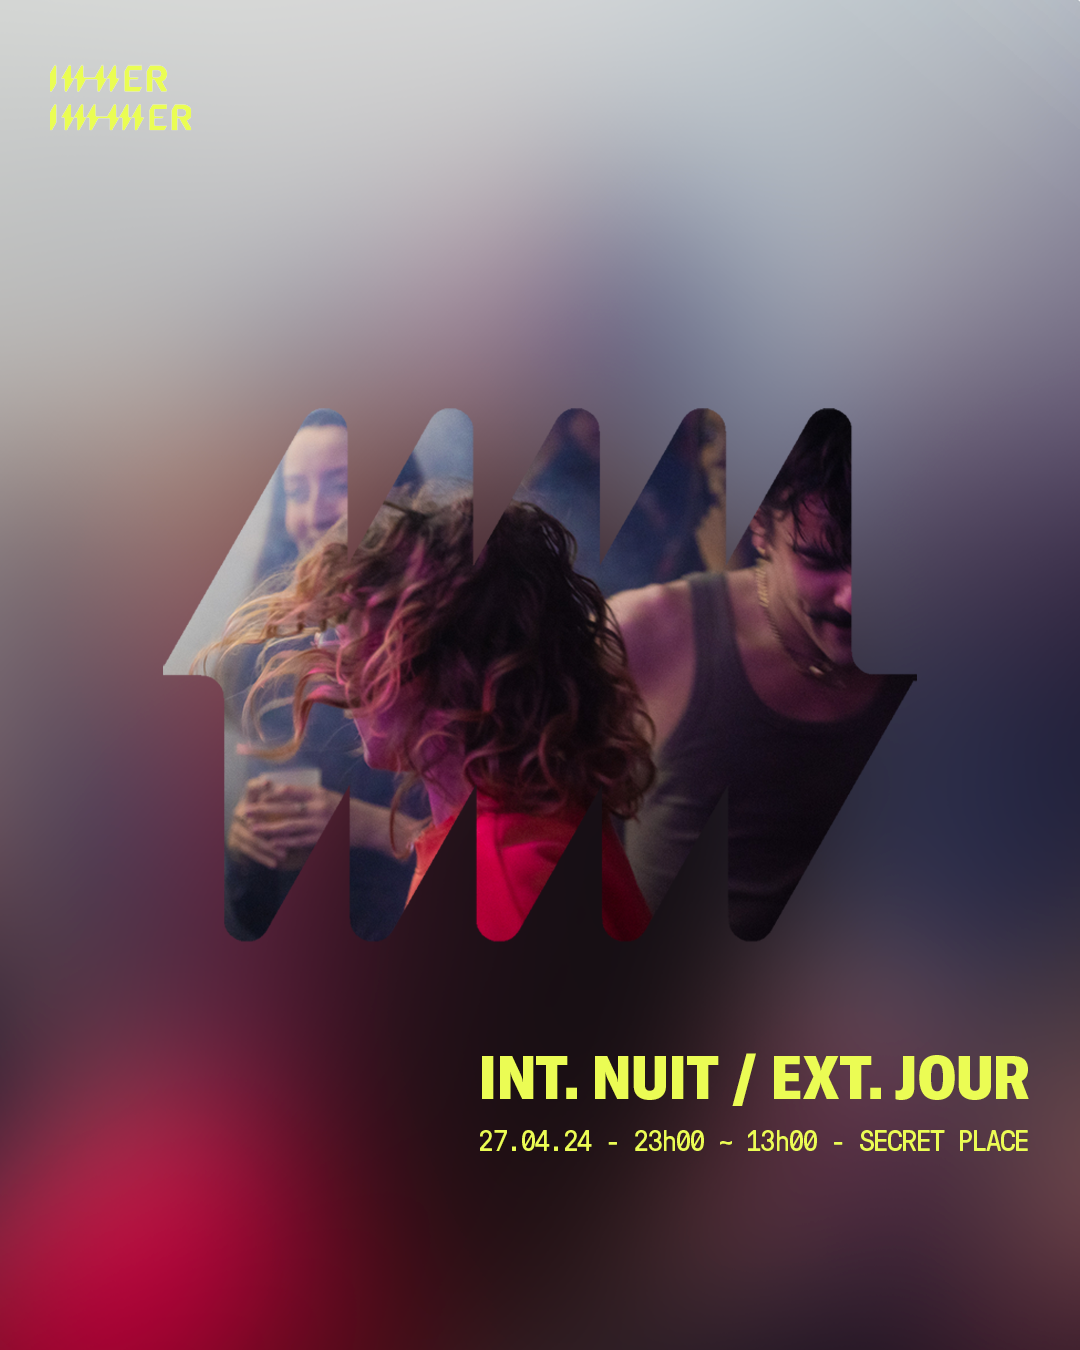 INT. NUIT / EXT. JOUR - Inner Immer agency night - Página frontal